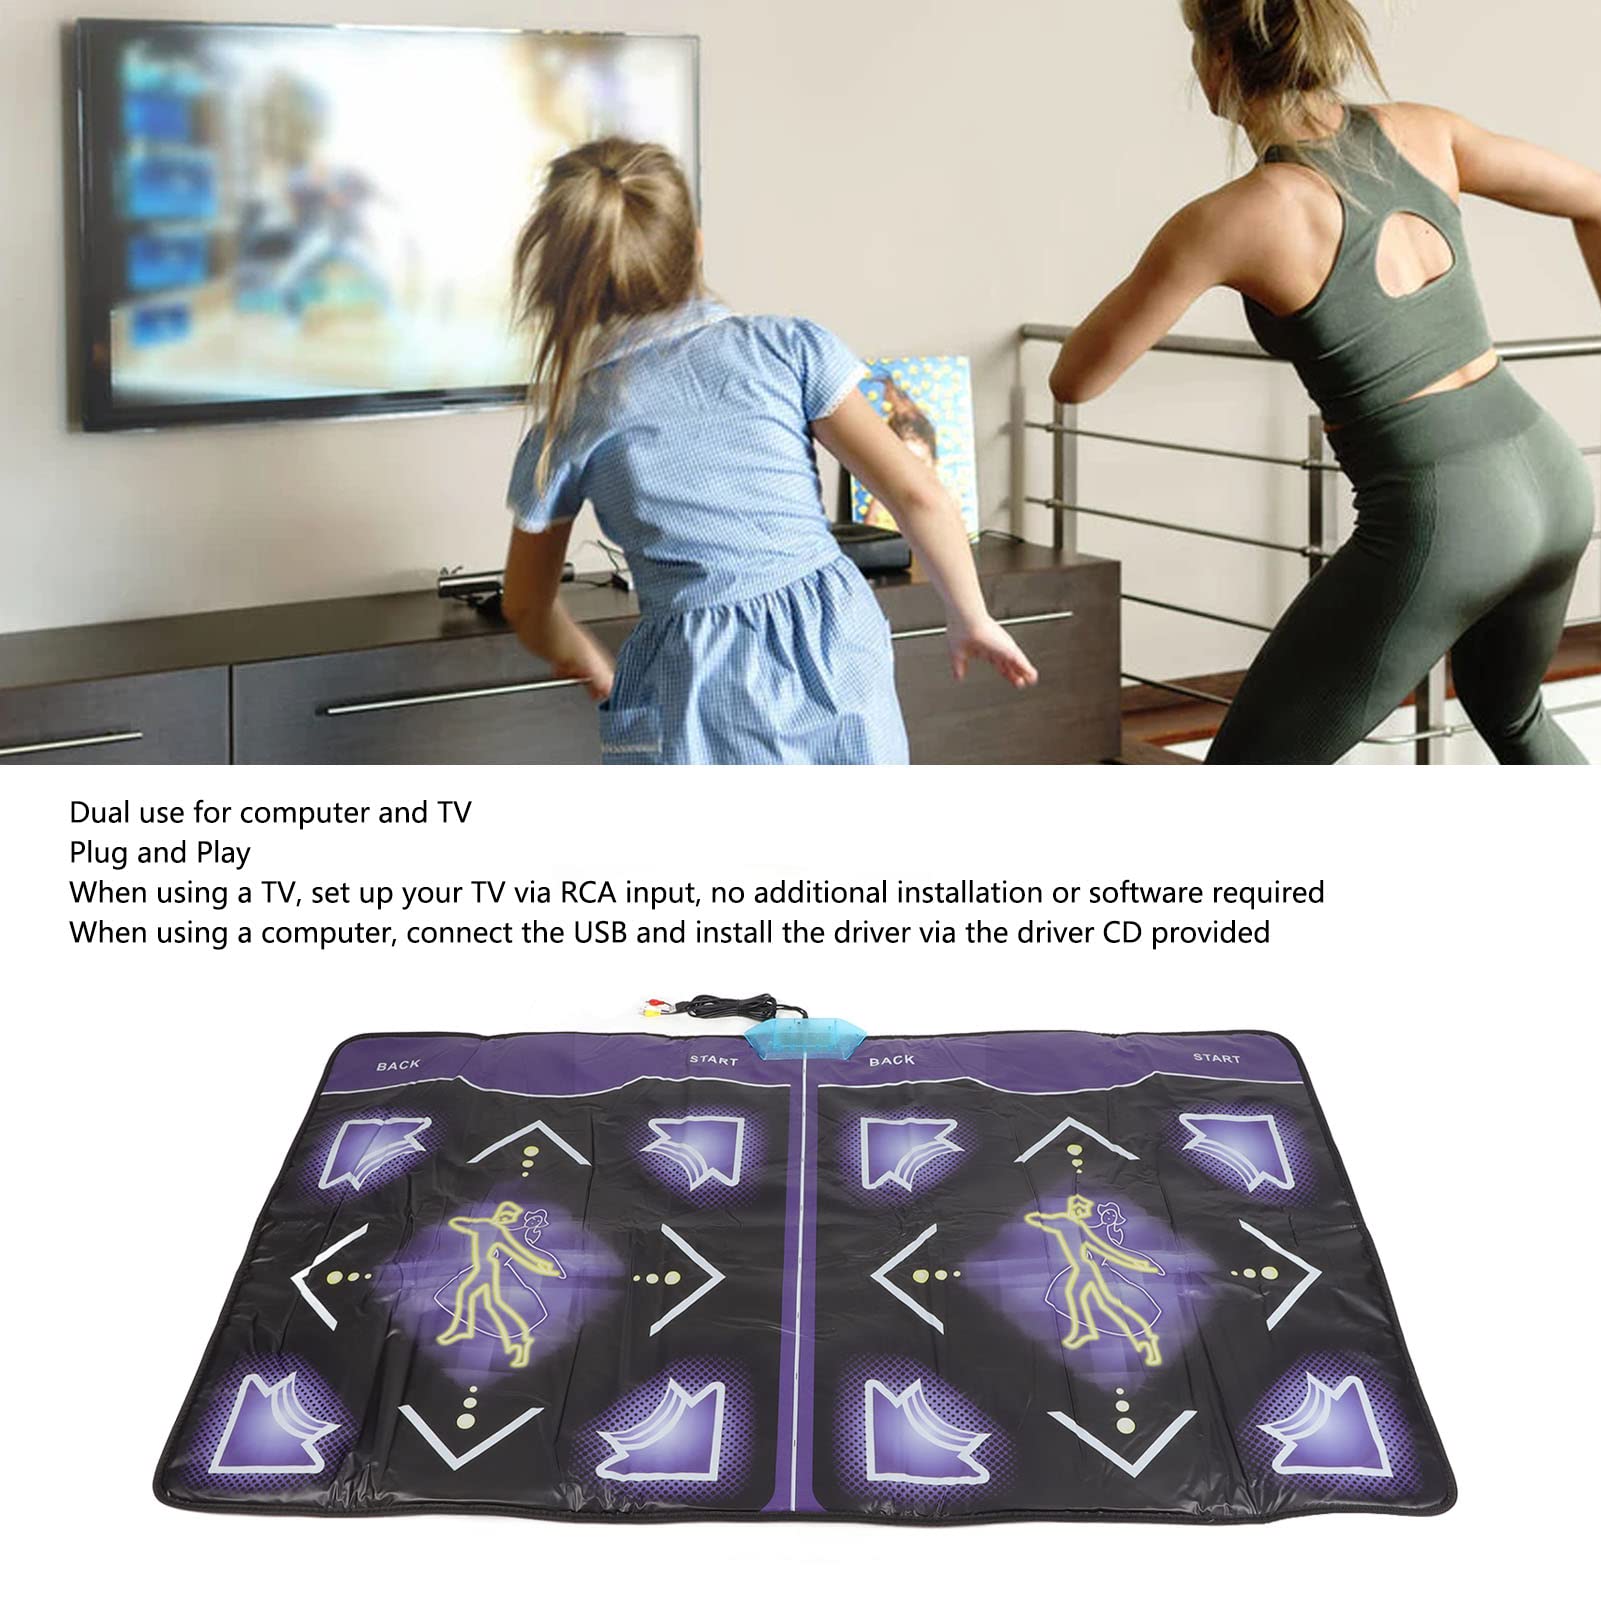 plplaaoo Dance Mat, Double Dance Mat, Electronic Dance Mat, Dance Mat Adult and Children's Double Dance Floor Mat with Handle Support Memory Card for Kids & Adults, Gift for Boys & Girls 100‑240V